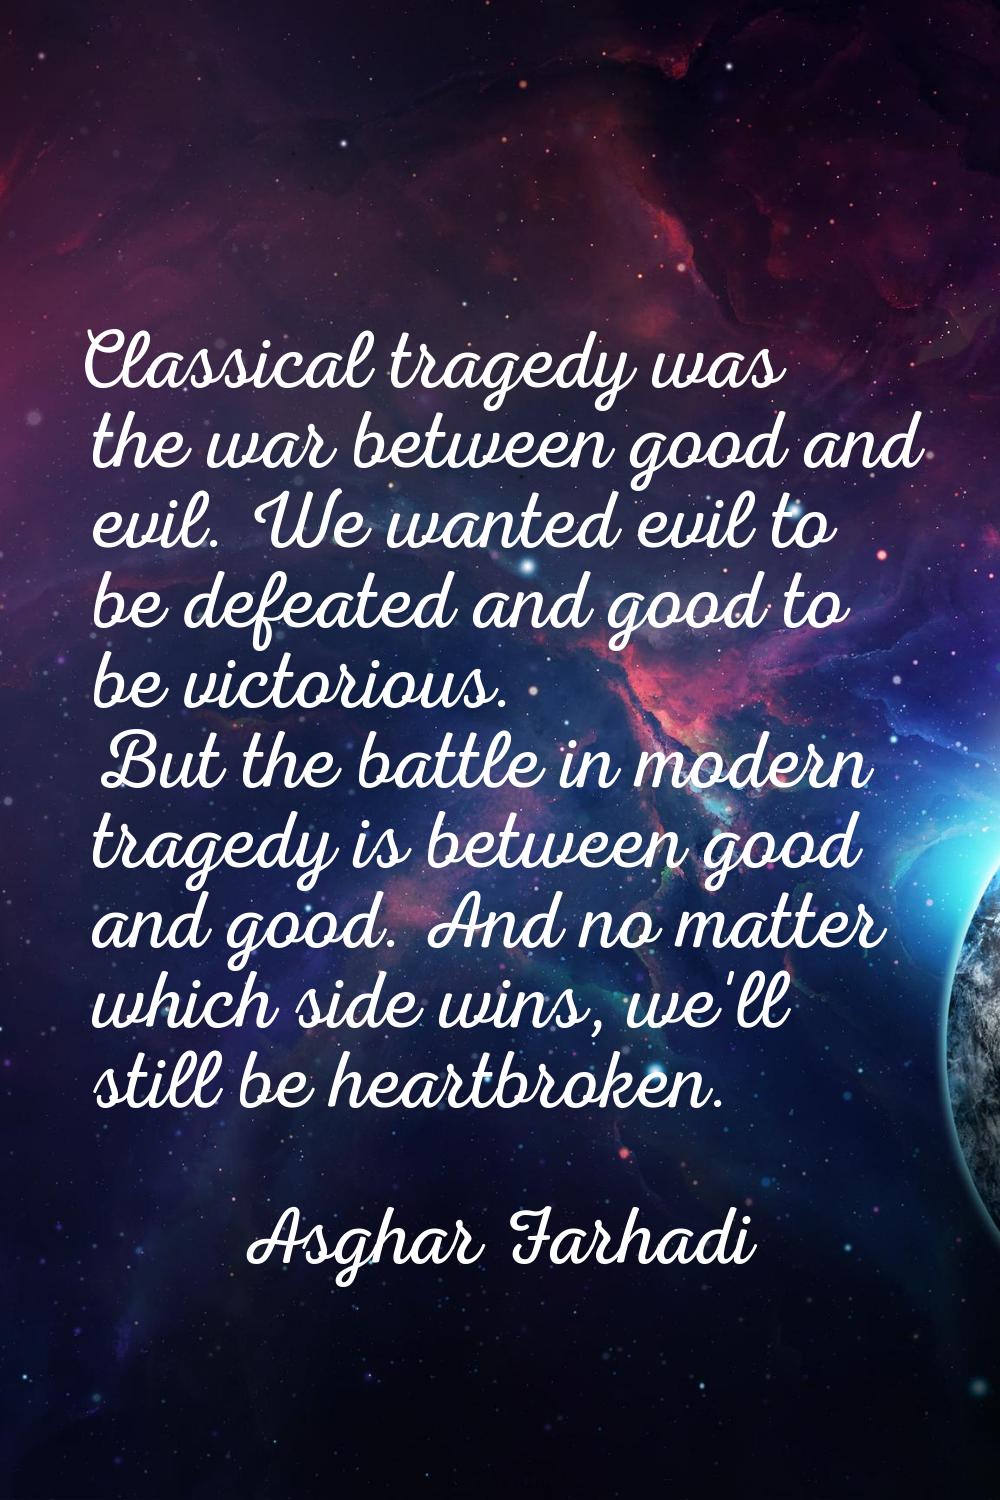 Classical tragedy was the war between good and evil. We wanted evil to be defeated and good to be v